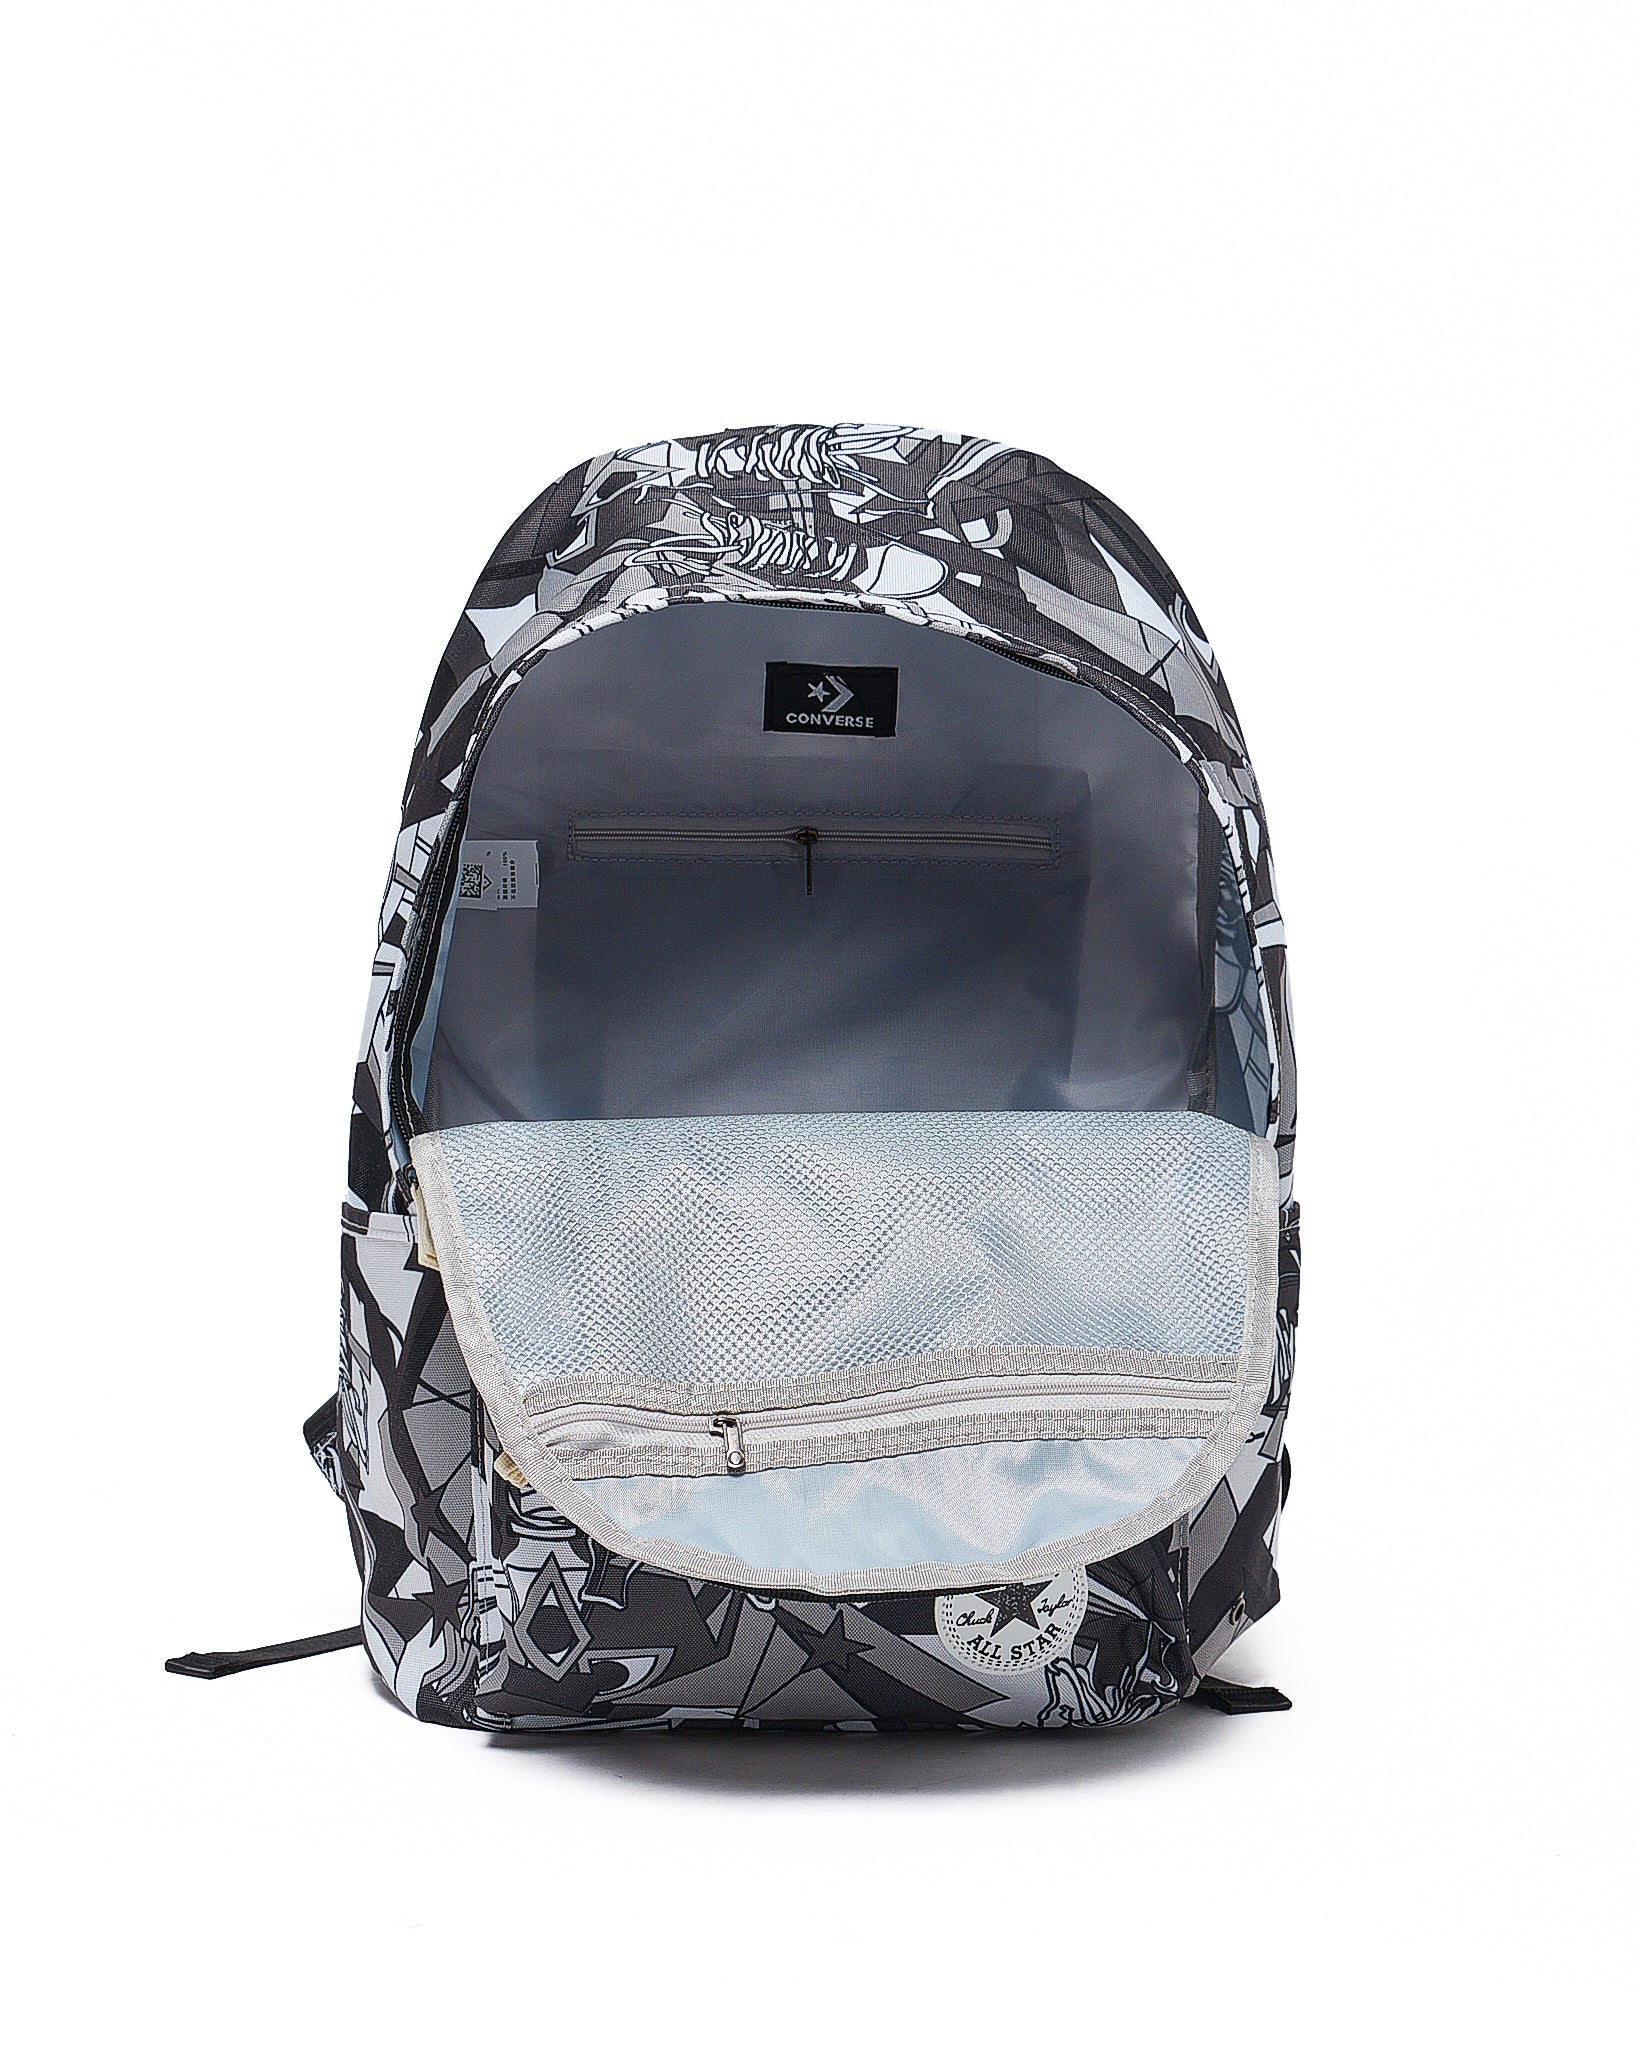 MOI OUTFIT-Graffiti Over Printed Unisex Backpack 23.90